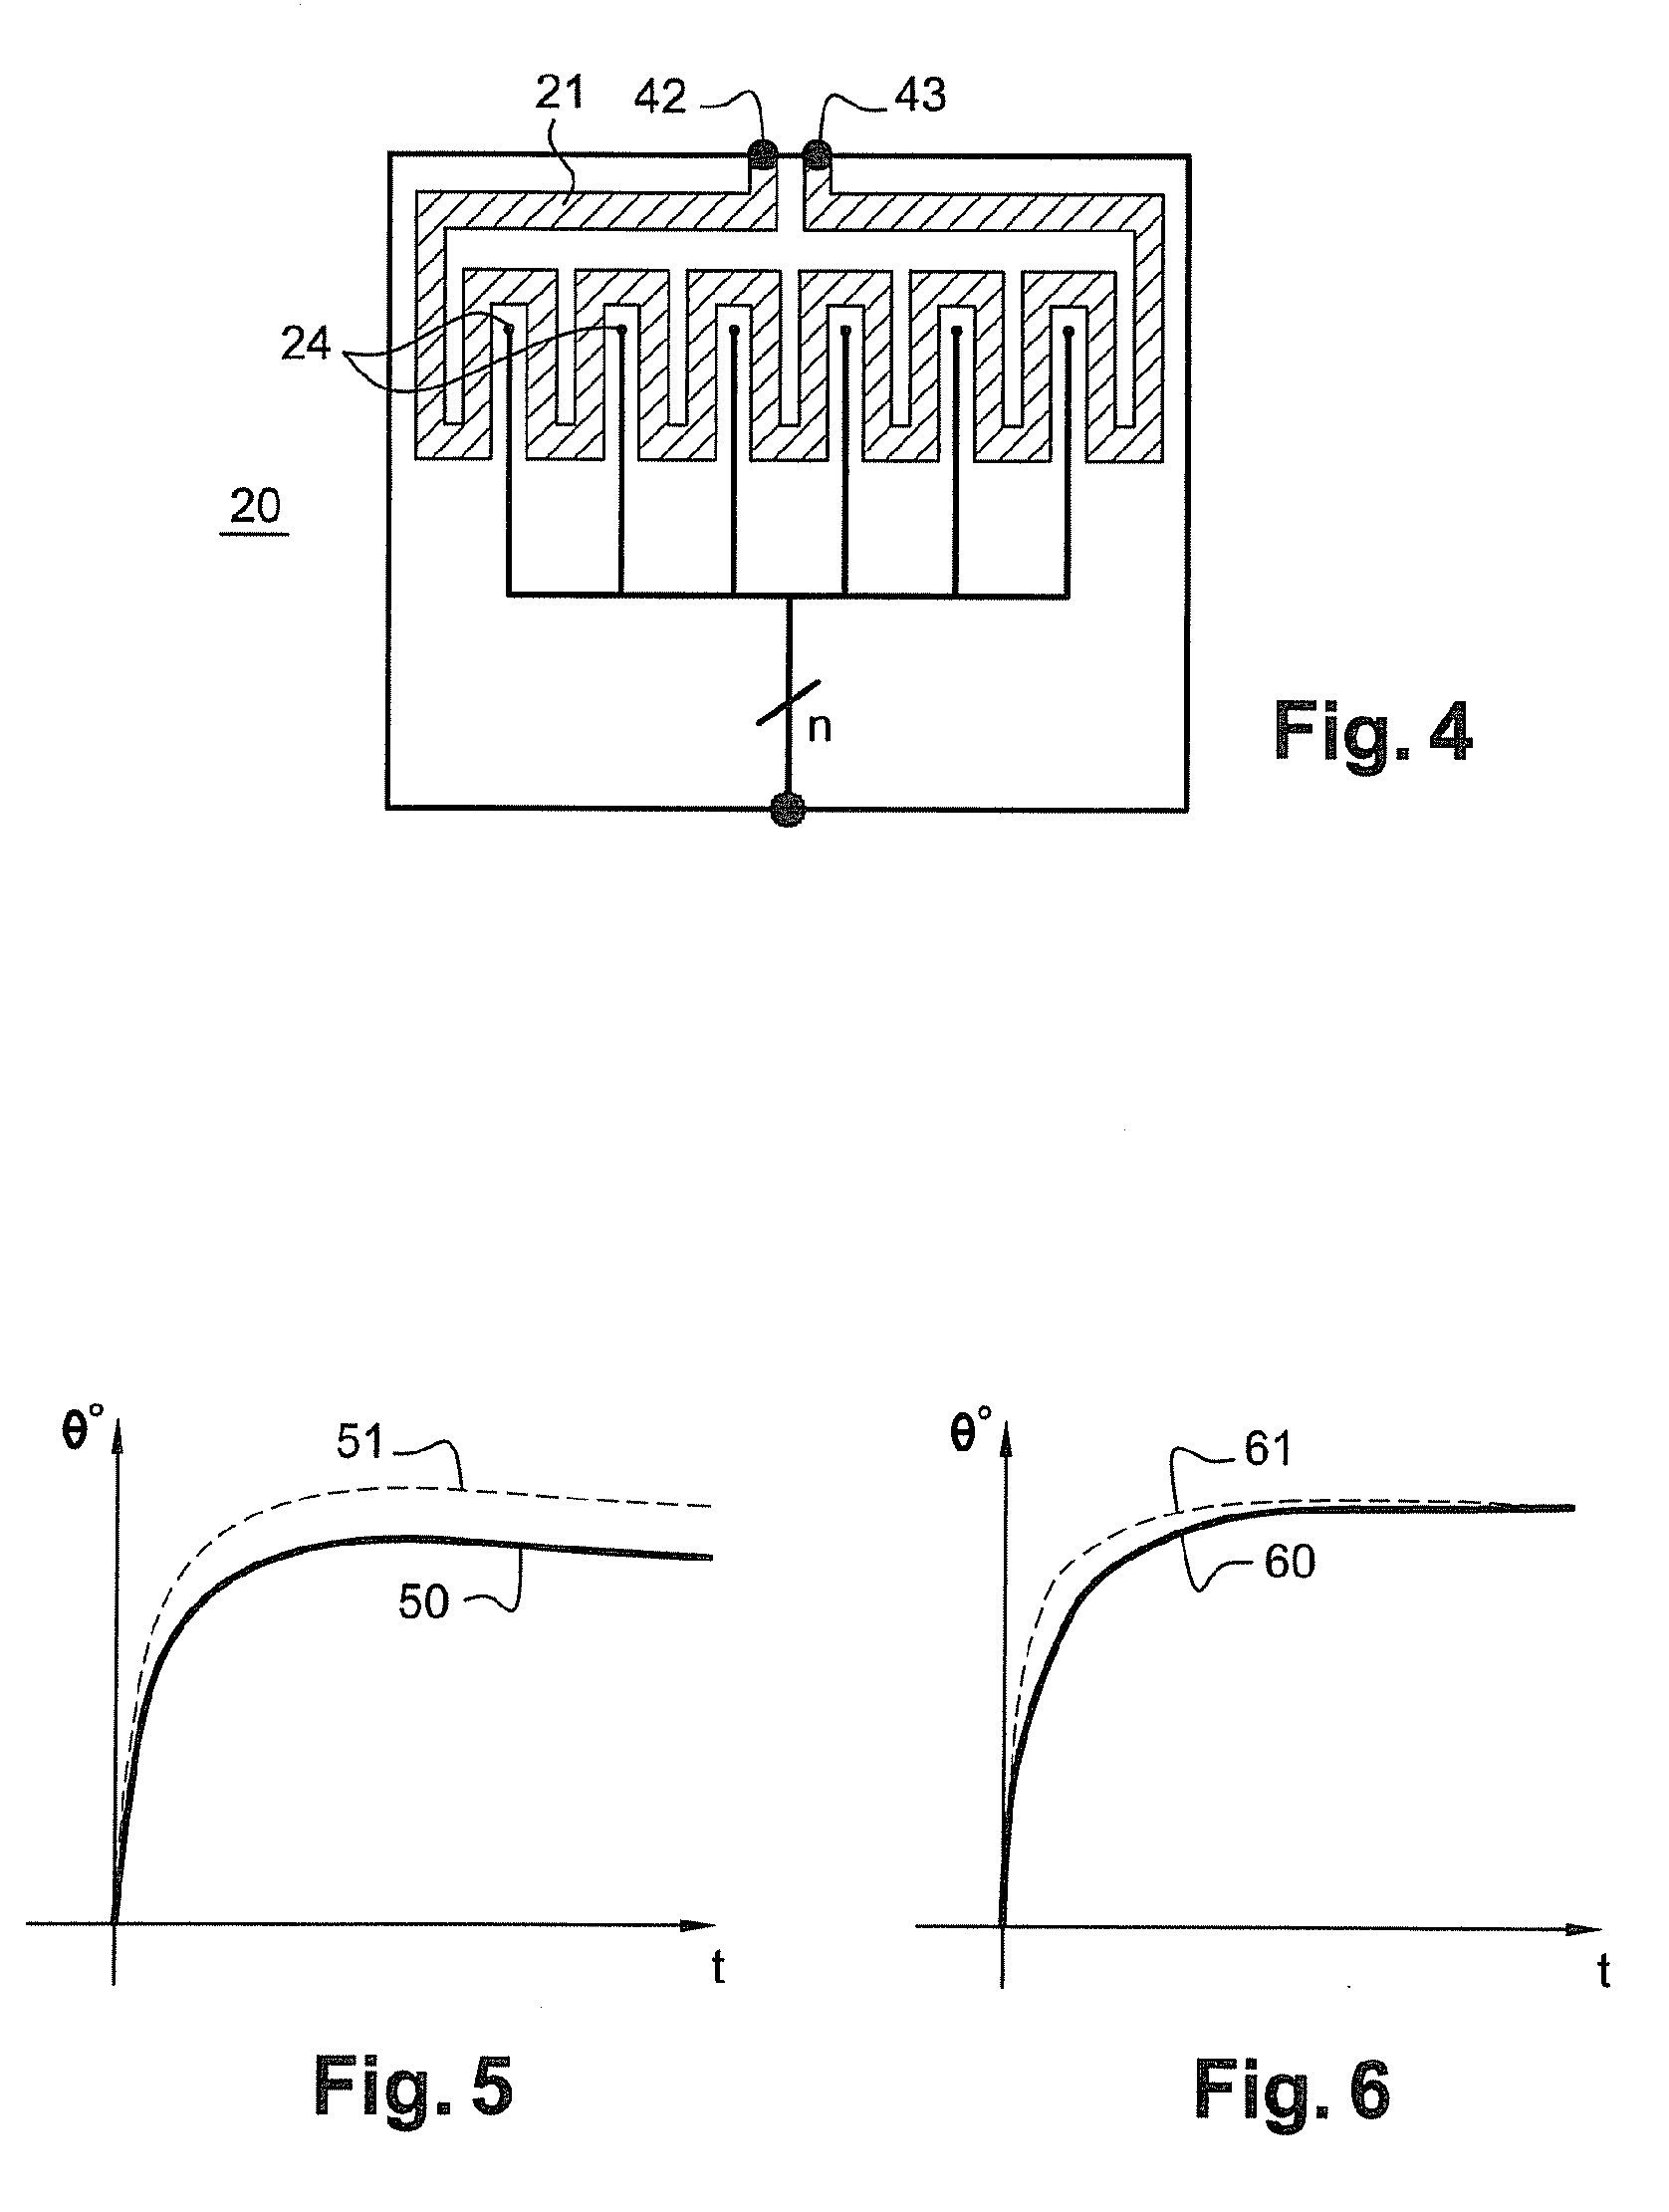 Plate-type heat exchanger including a device for evaluating the extent to which it has become coated in scale